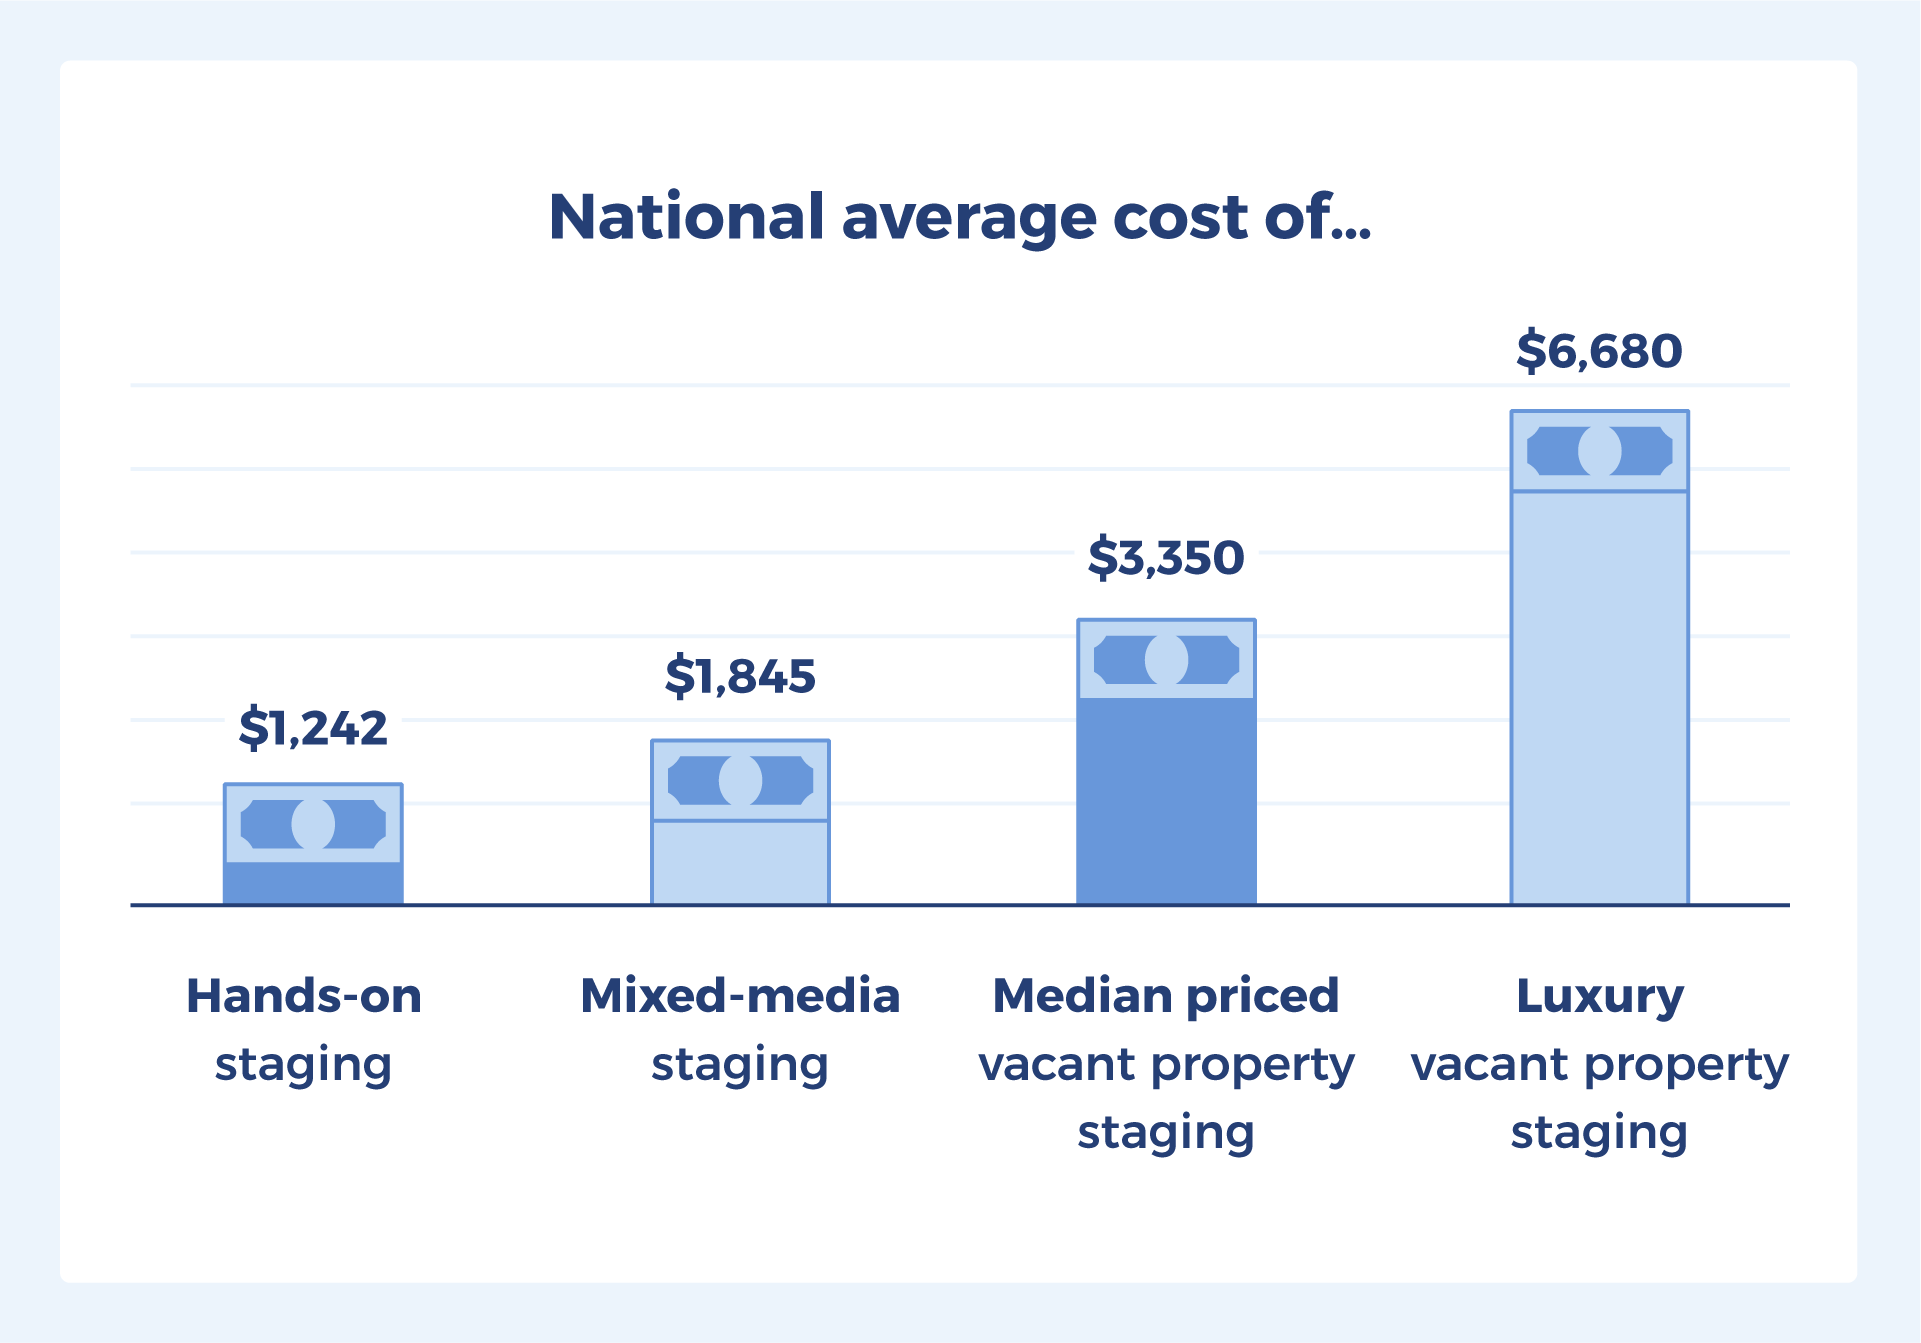 The national average cost of hands-on staging is $1,242, mixed-media staging is $1,845, median priced vacant property staging is $3,350, and for a luxury vacant property staging is $6,680.